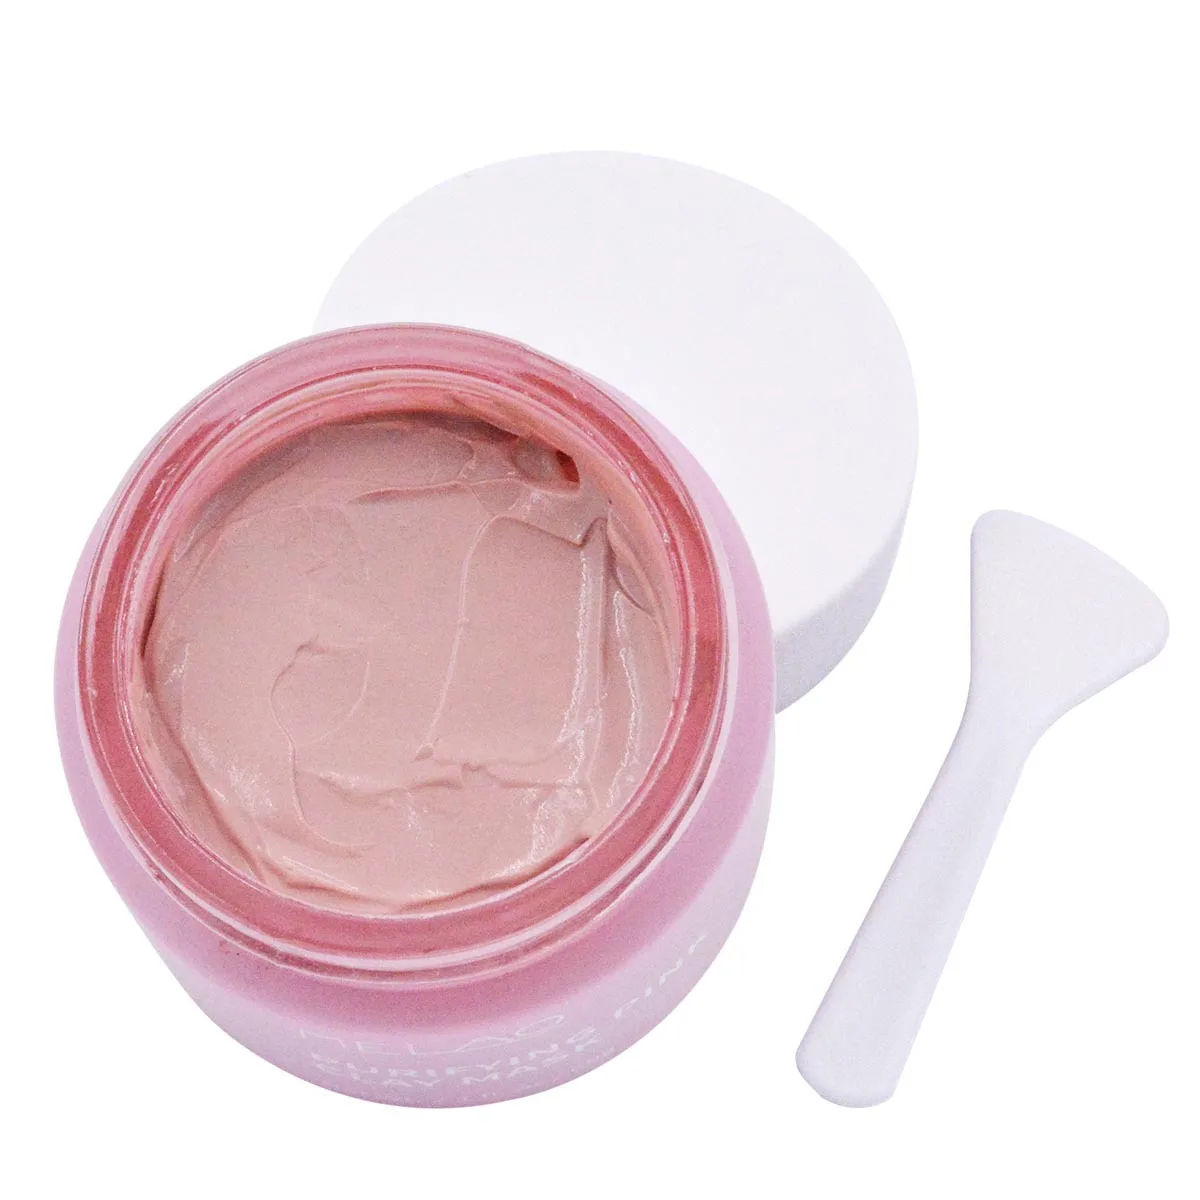 

Australian Facial Mask Skin Care Private Label Brighten and Porefining Organic Skin Care Pink Clay Face Mask